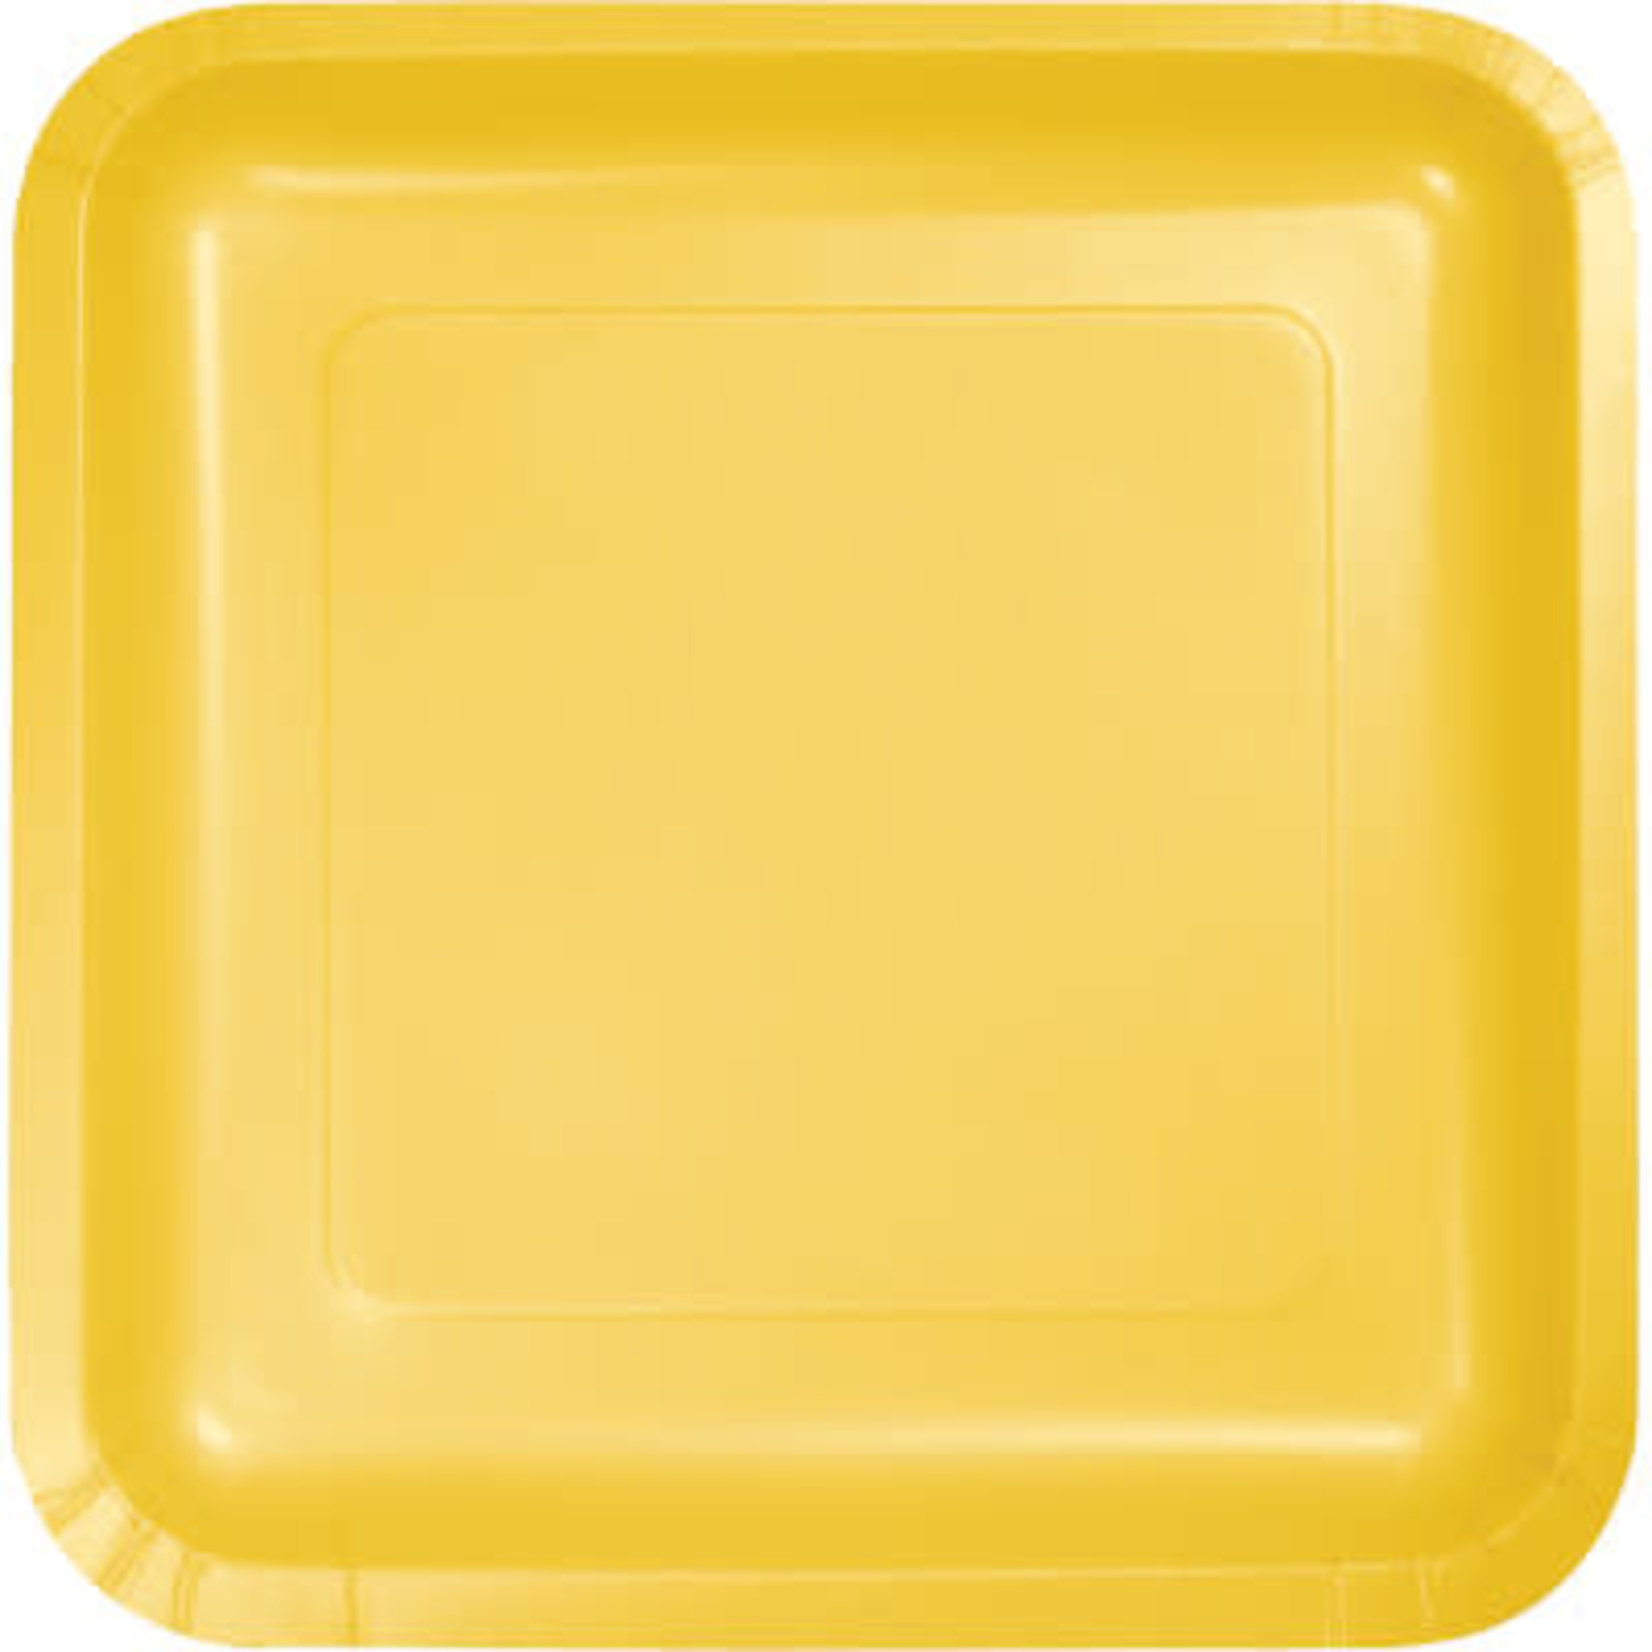 Touch of Color 7" School Bus Yellow Square Paper Plates - 18ct.